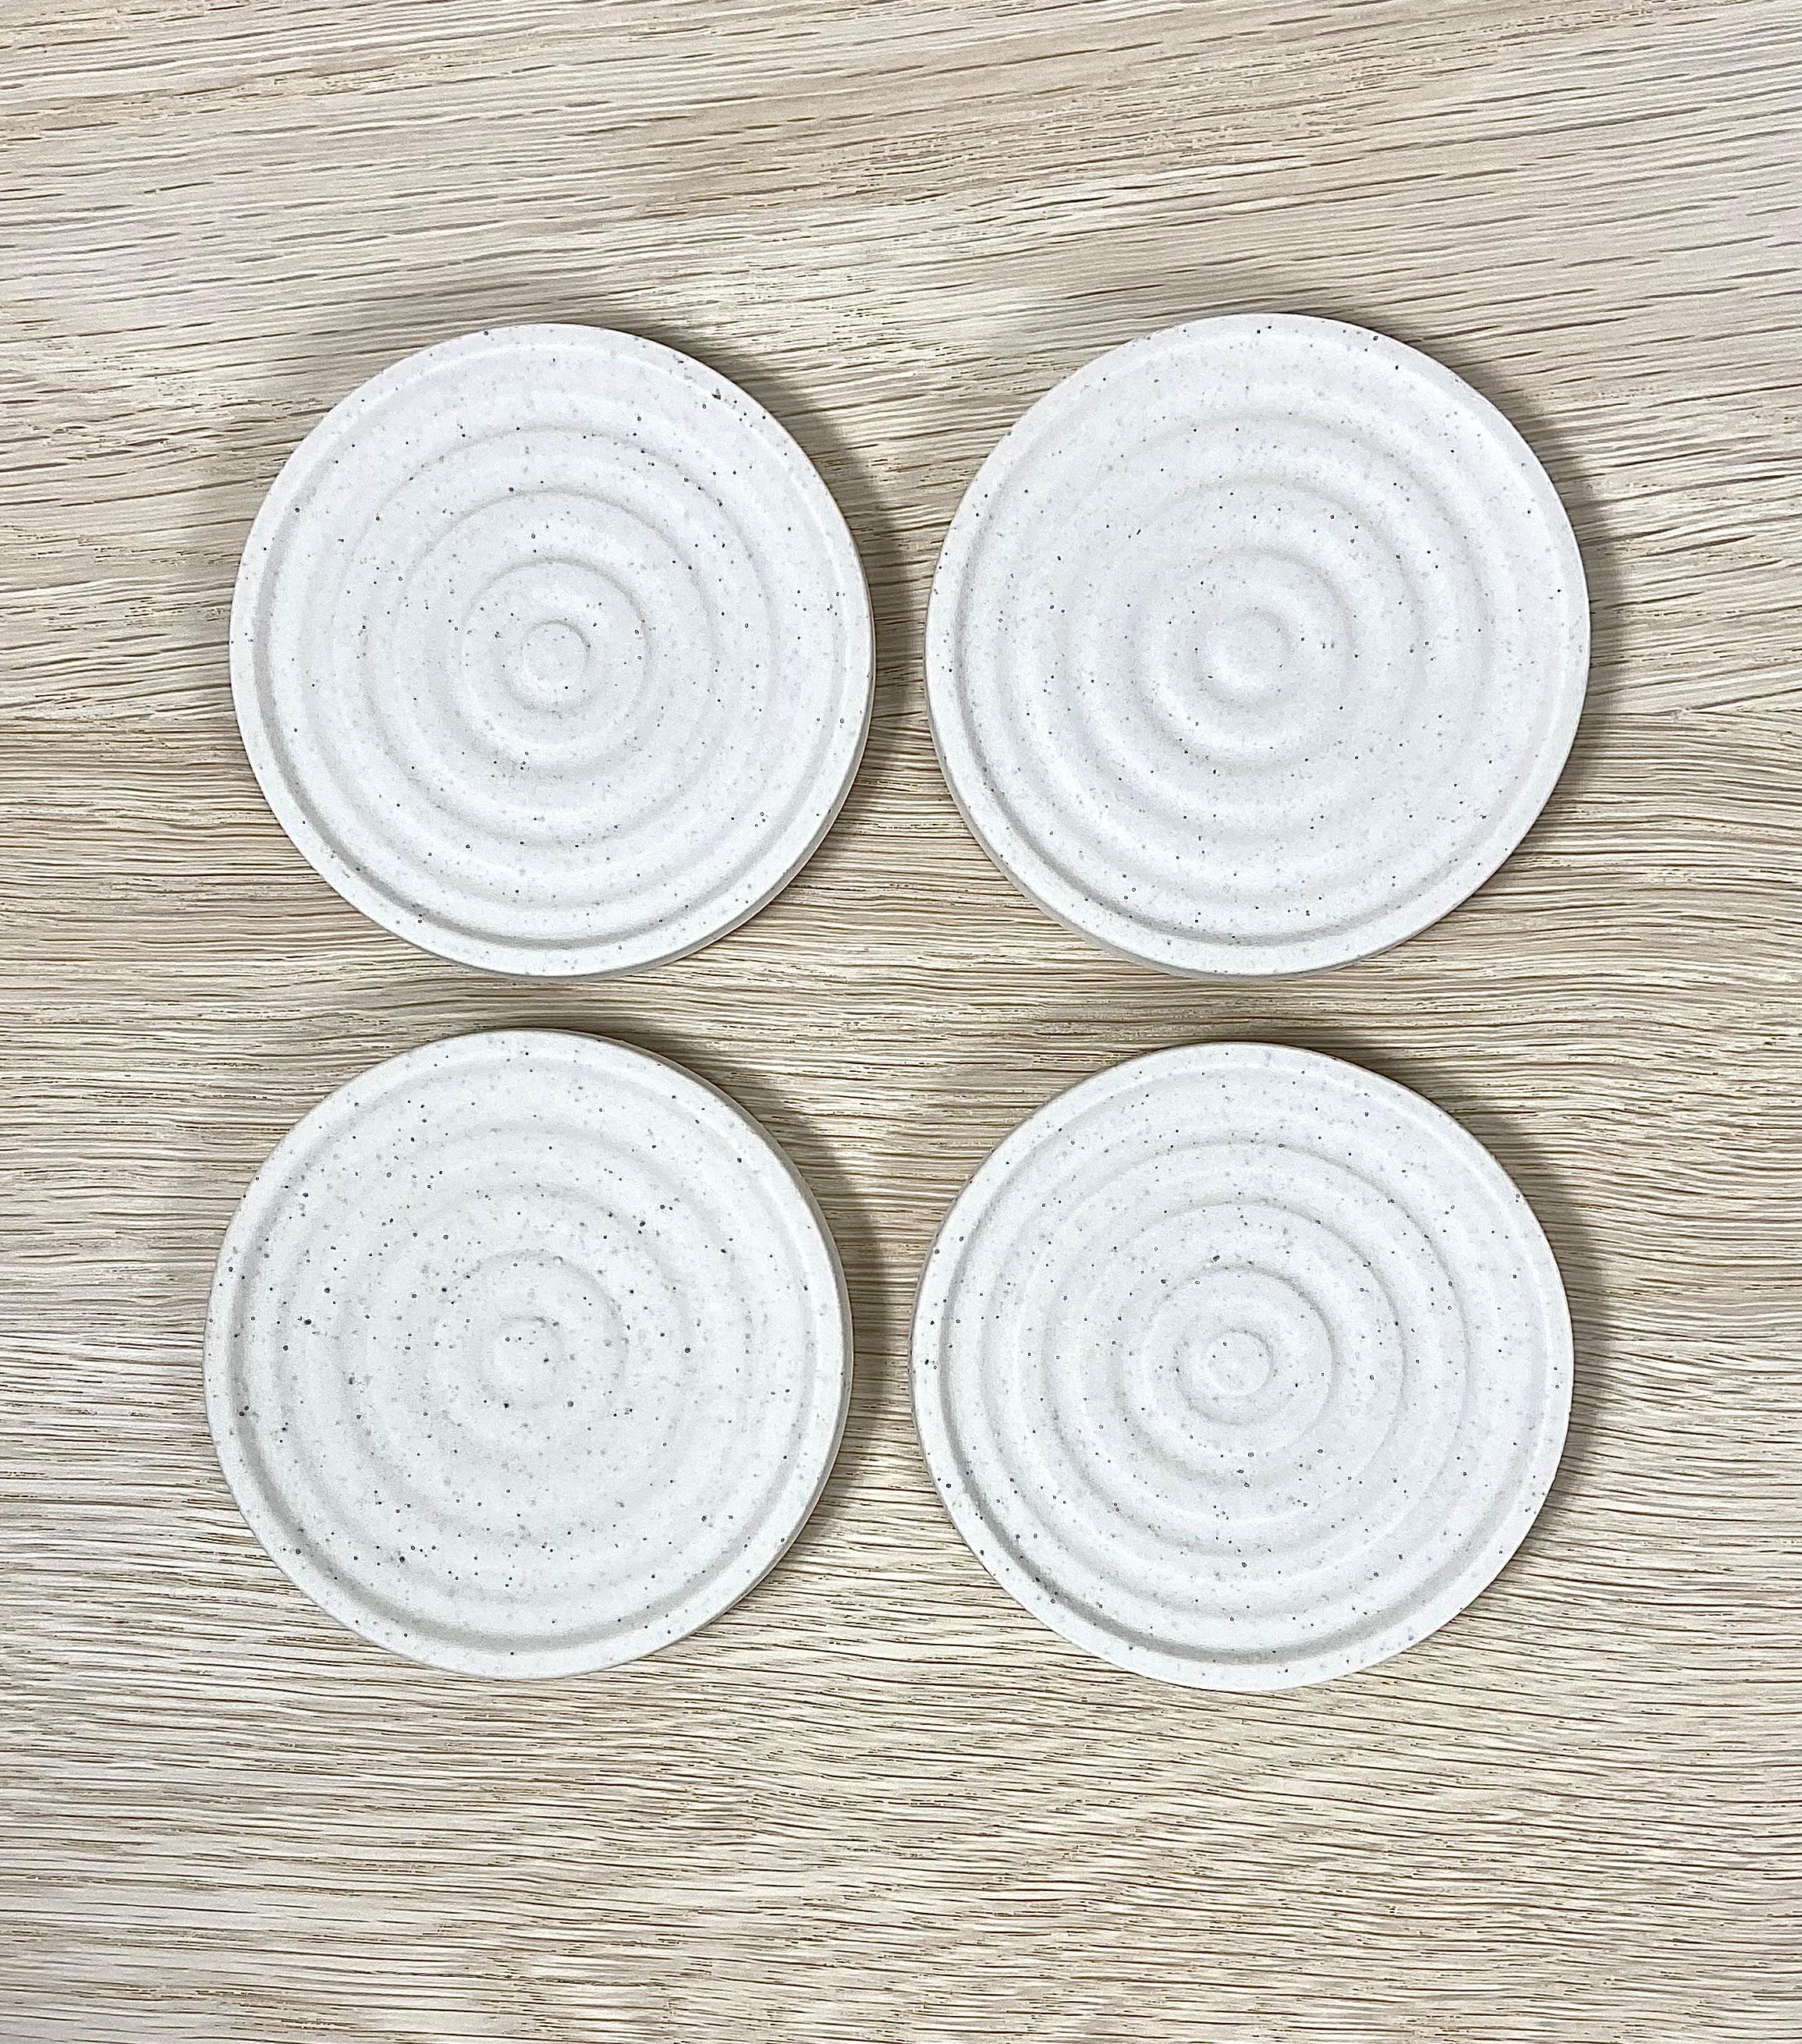 A set of 4 porcelain coasters with a speckled swirl pattern. The ivory coasters have a cork bottom to protect your surfaces and also stack neatly on top of one another. A stylish and modernist set that looks great in any interior, be it modern or